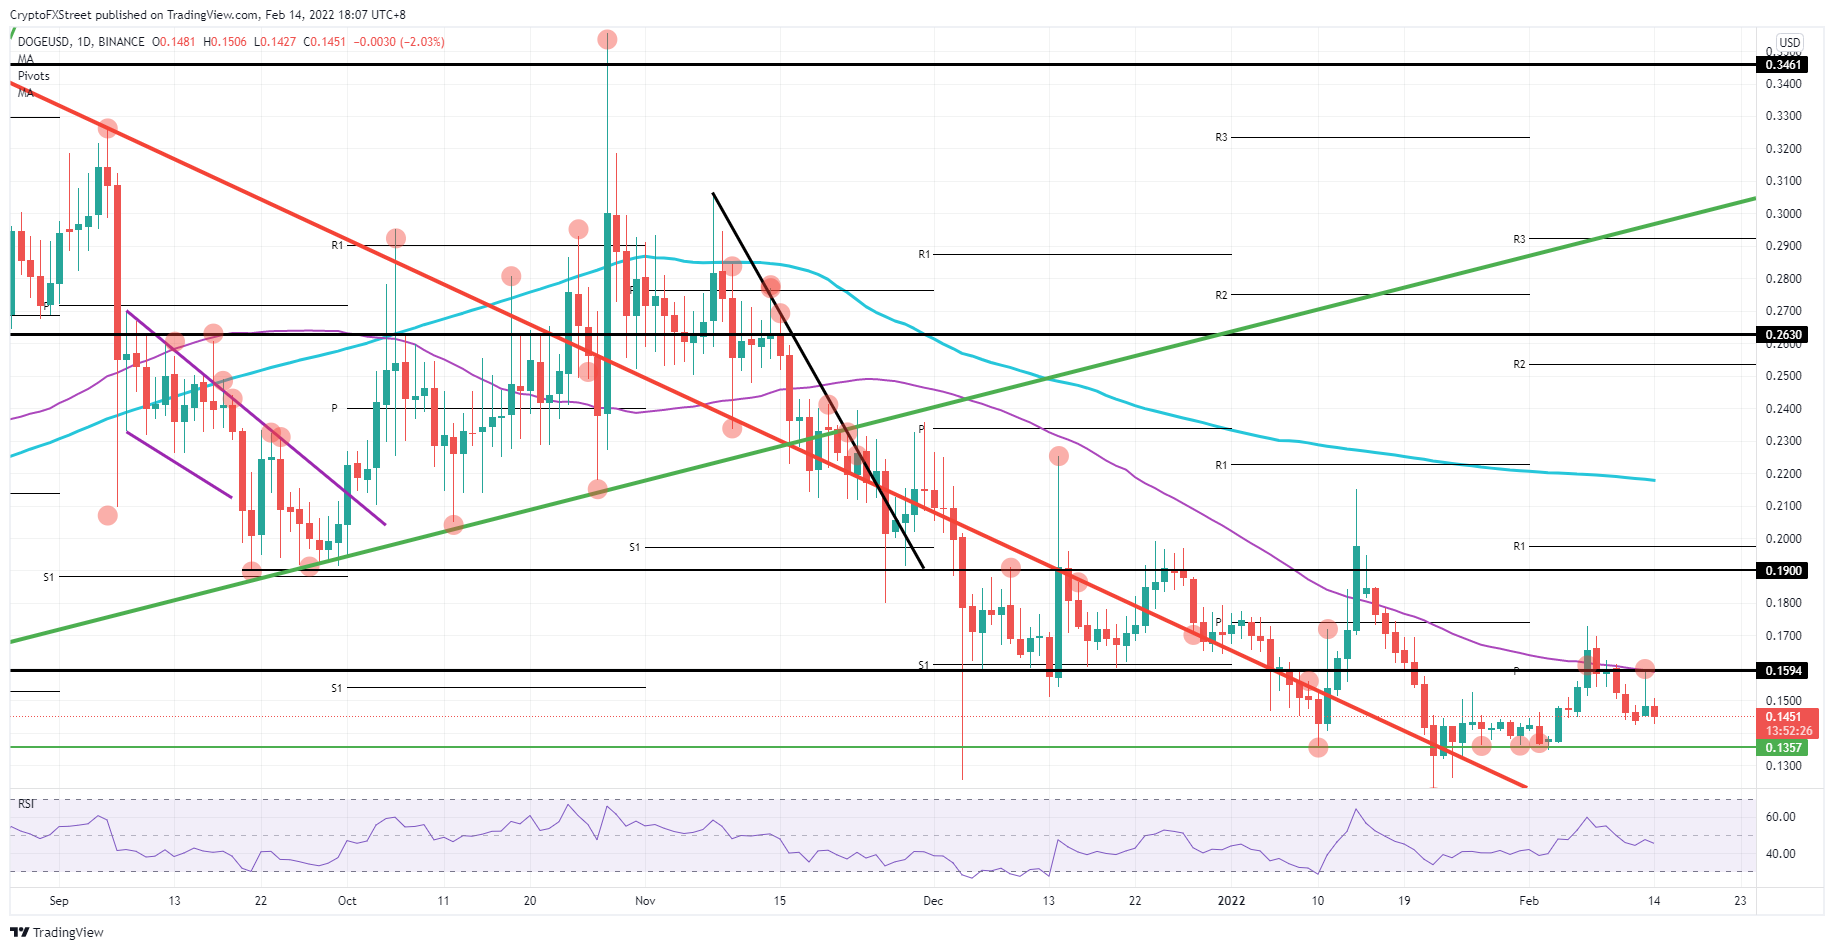 Dogecoin price prediction: DOGE to first tank 7%, before rallying 40% - 1